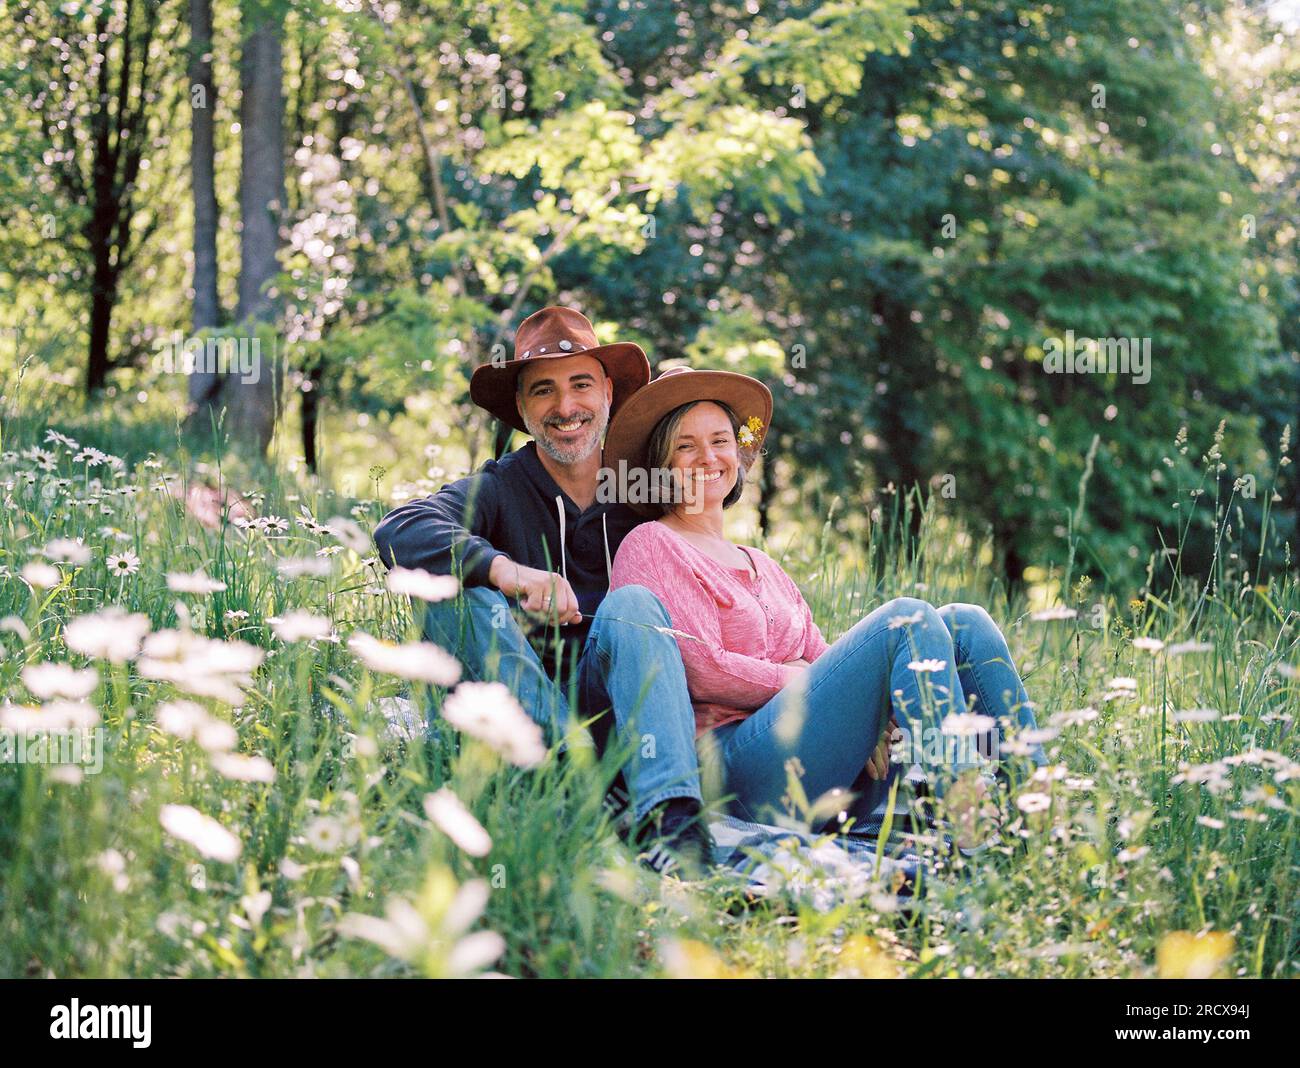 middle aged couple sitting together in the grass among wildflowers Stock Photo